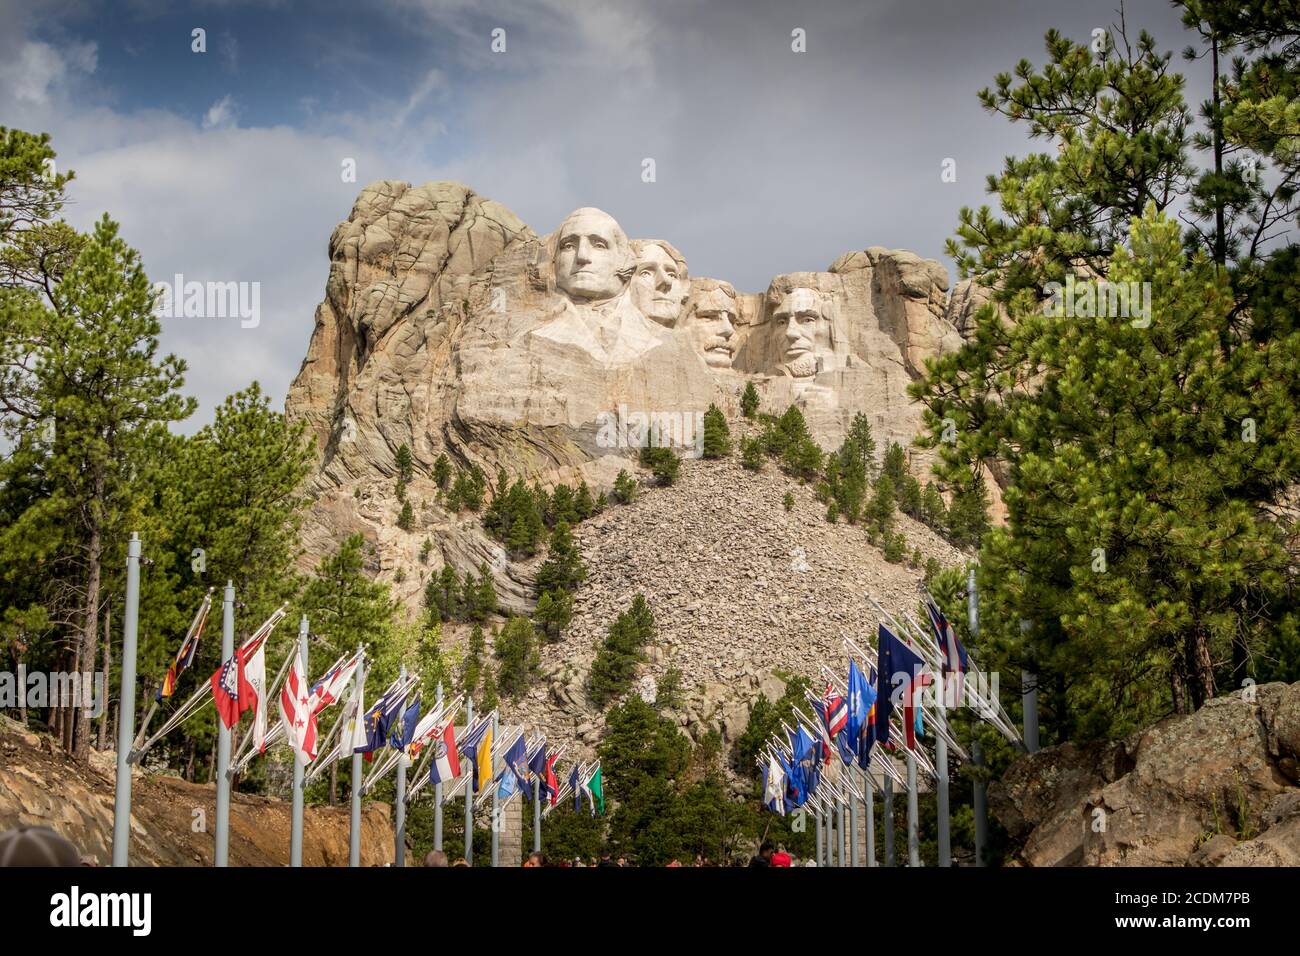 Mount Rushmore in Rapid City South Dakota with flags in foreground Stock Photo